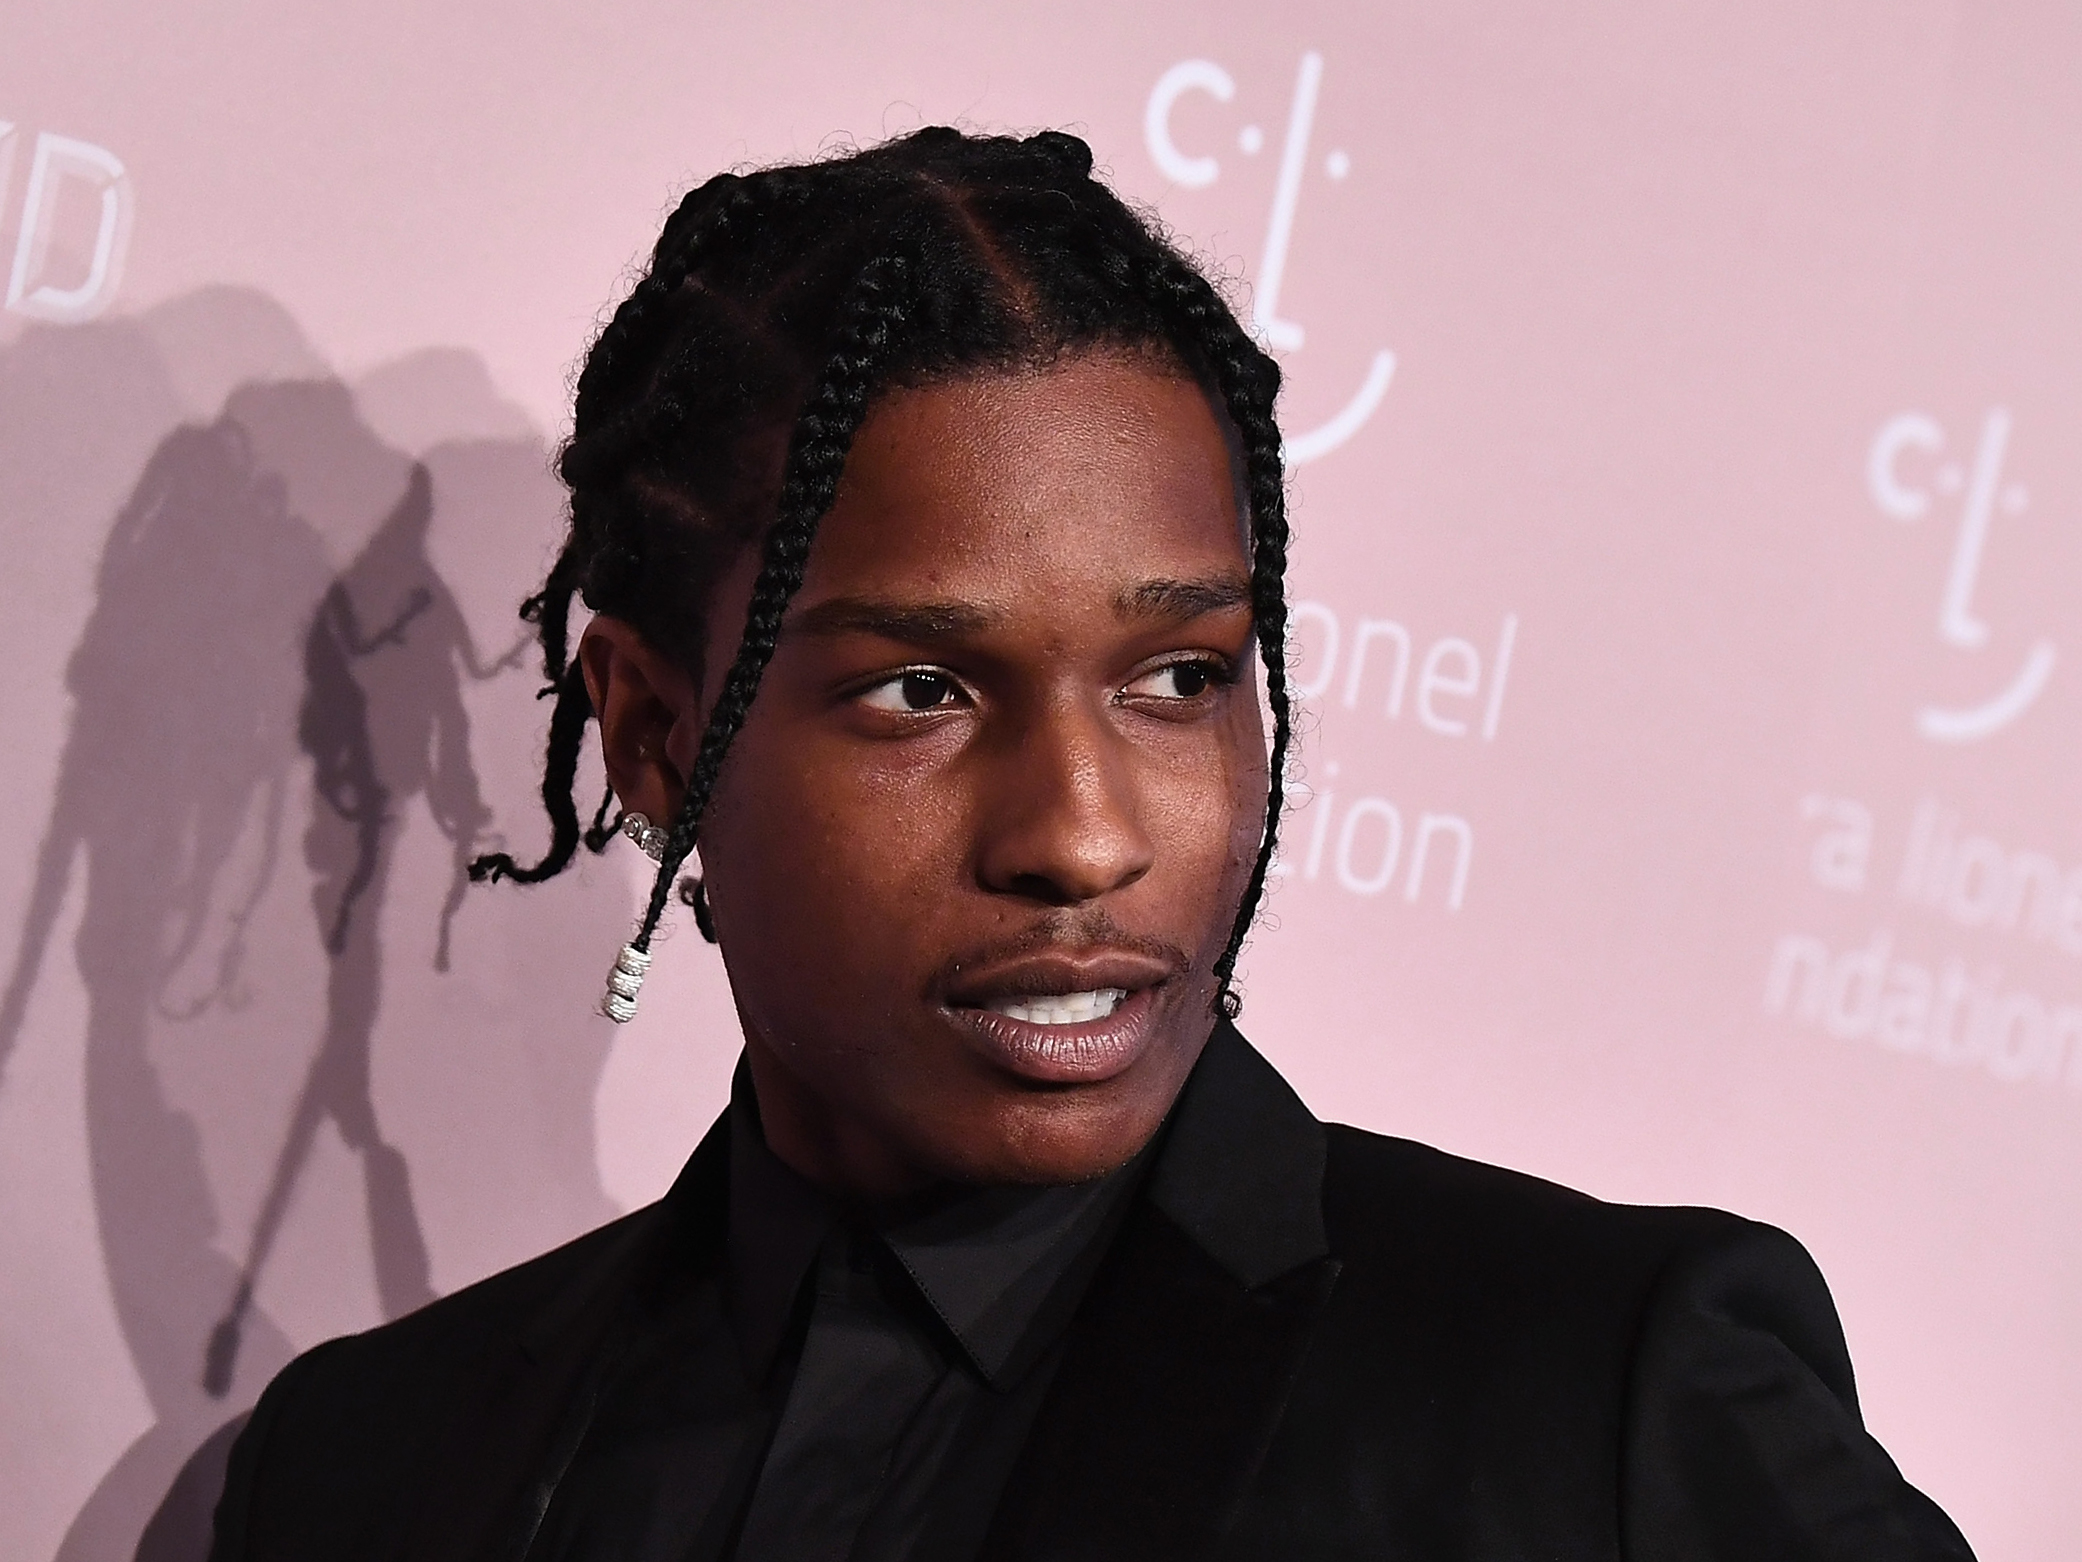 Swedish Prosecutor Requests More Time for A$AP Rocky Case - Bloomberg